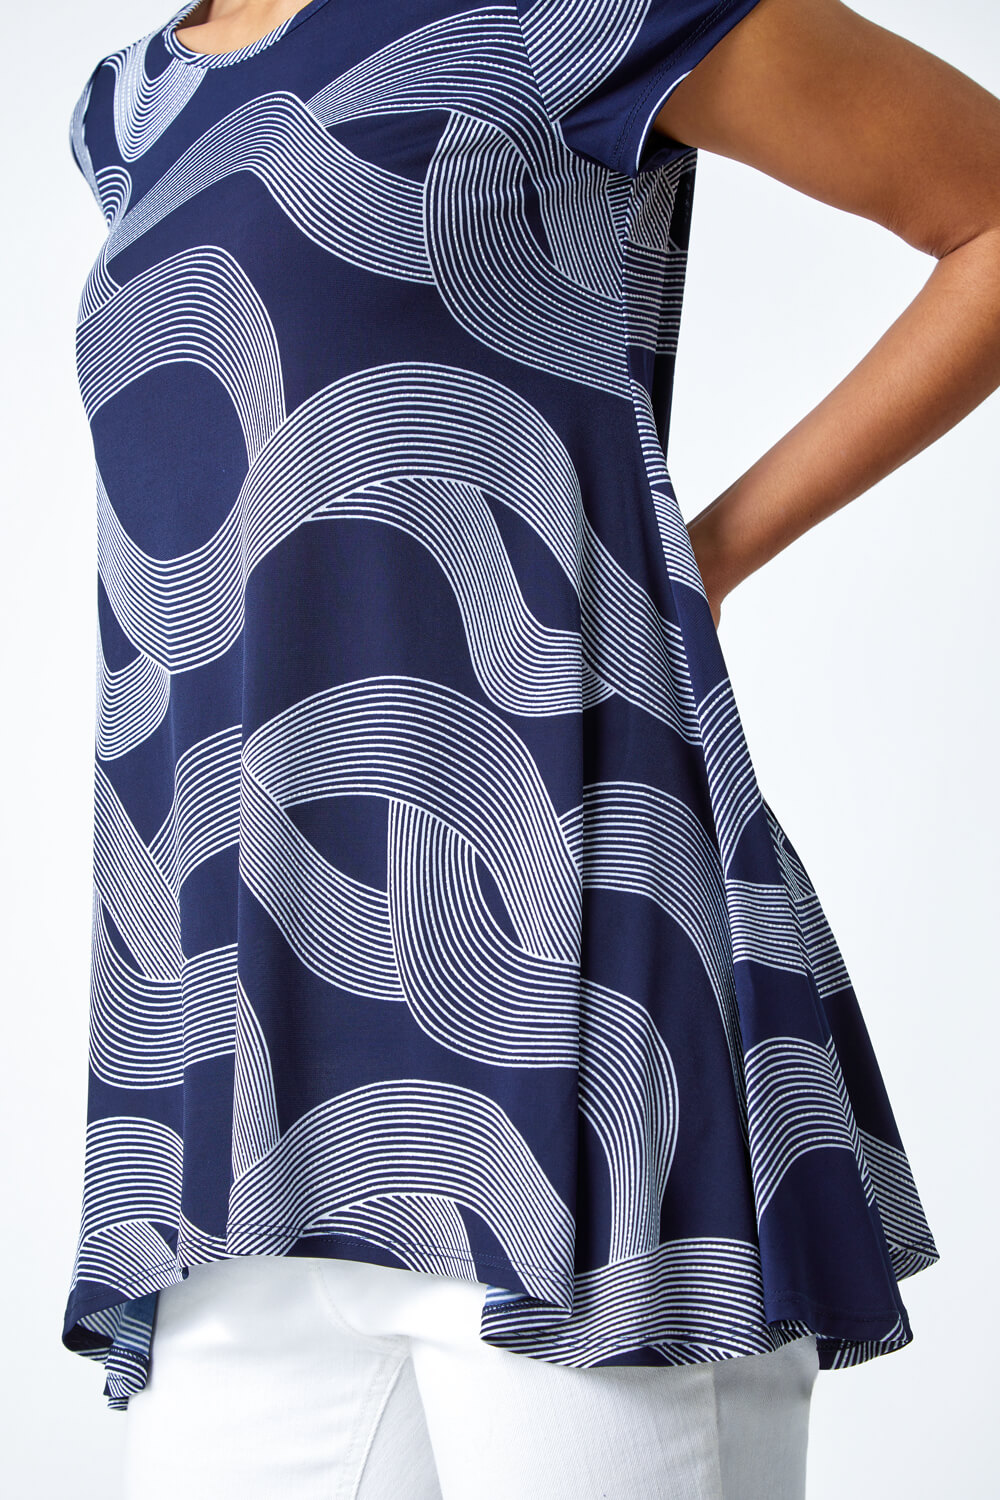 Navy  Abstract Swirl Print Stretch Top, Image 4 of 5